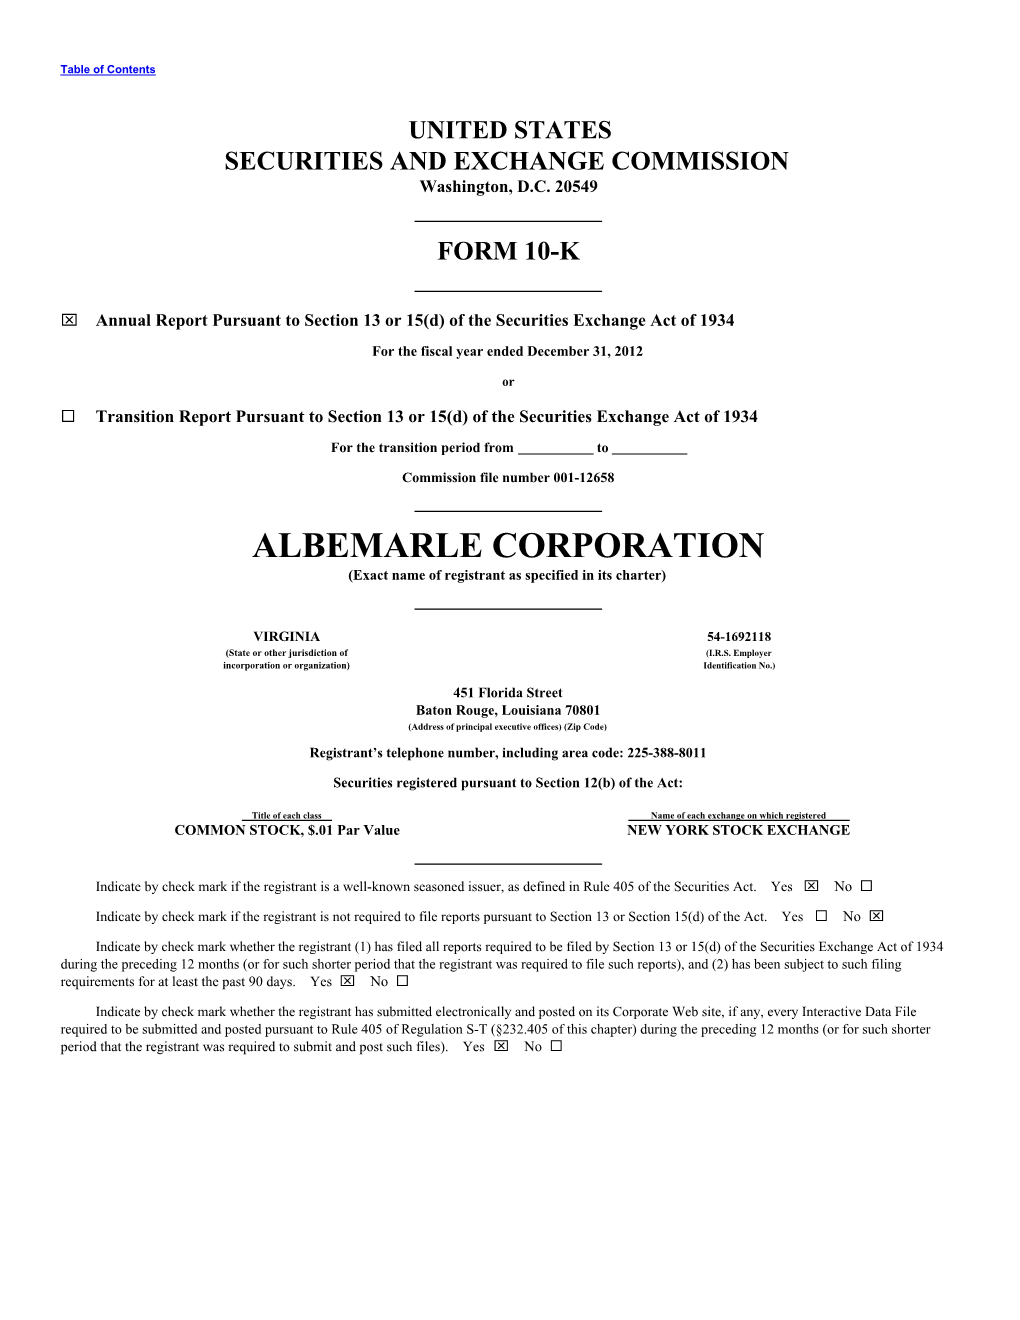 ALBEMARLE CORPORATION (Exact Name of Registrant As Specified in Its Charter)